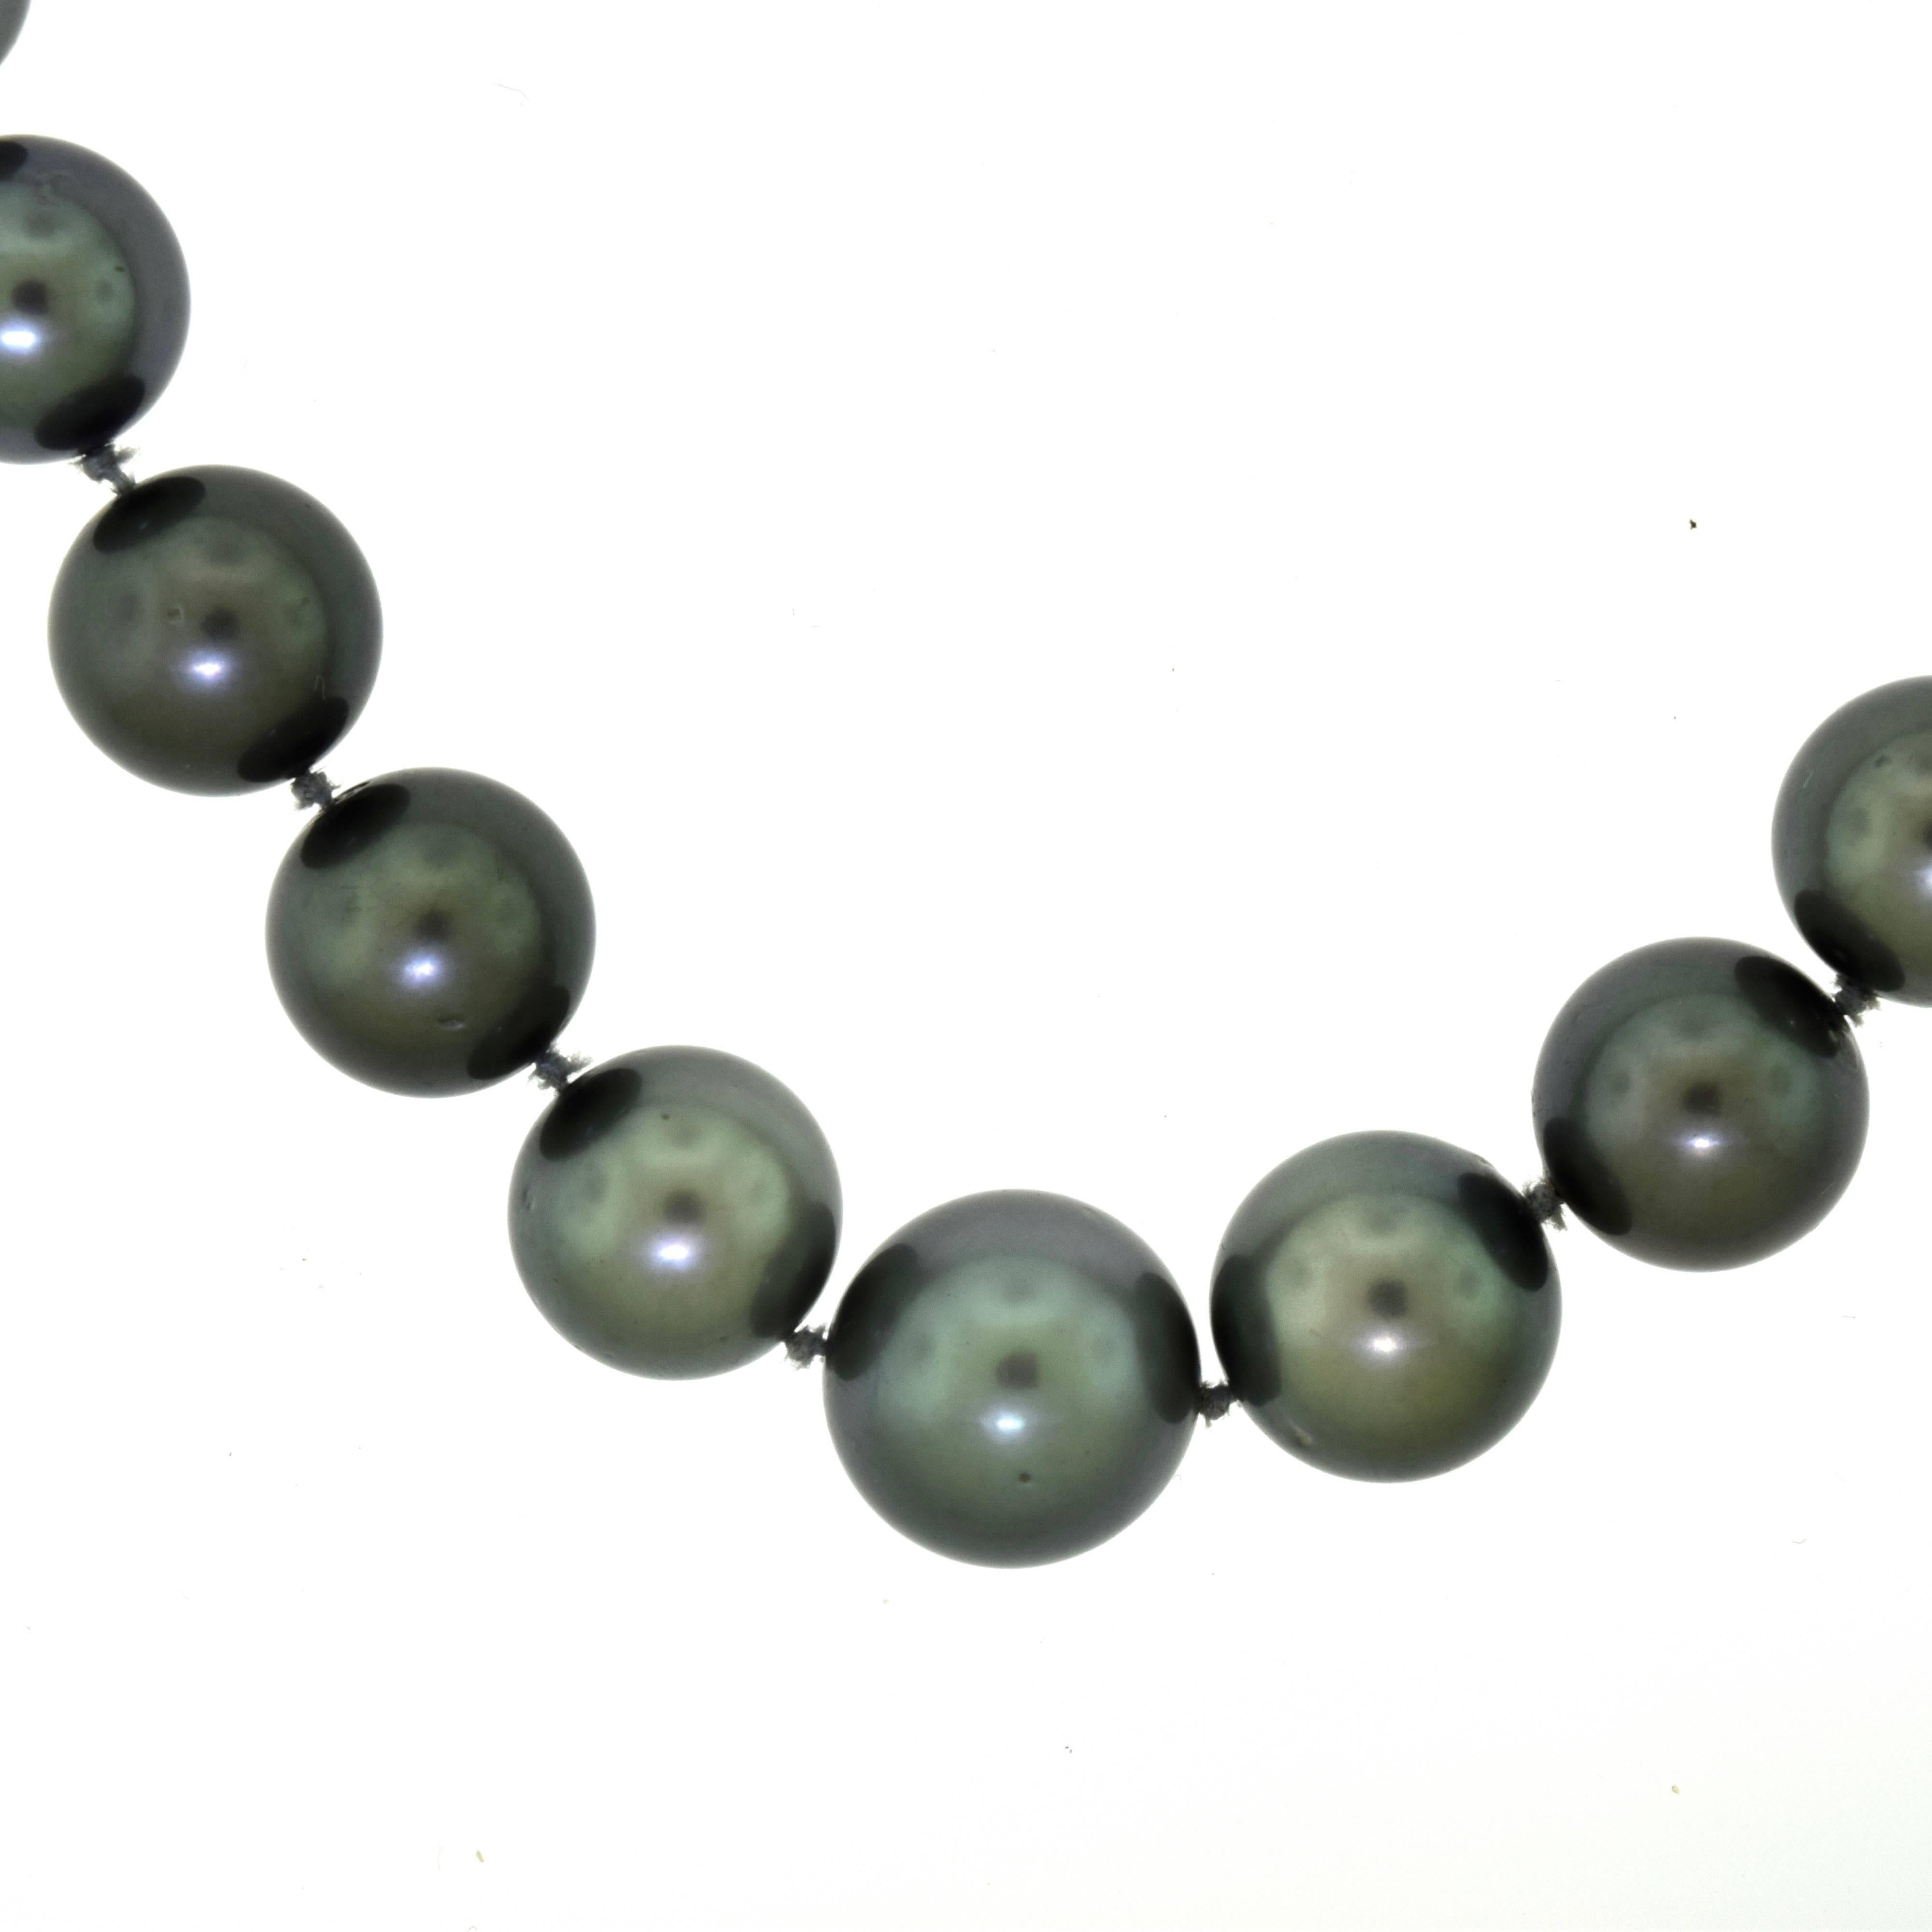 Van Cleef & Arpels Tahitian Pearl and Diamond Necklace in 18 Karat White Gold In Excellent Condition For Sale In Miami, FL